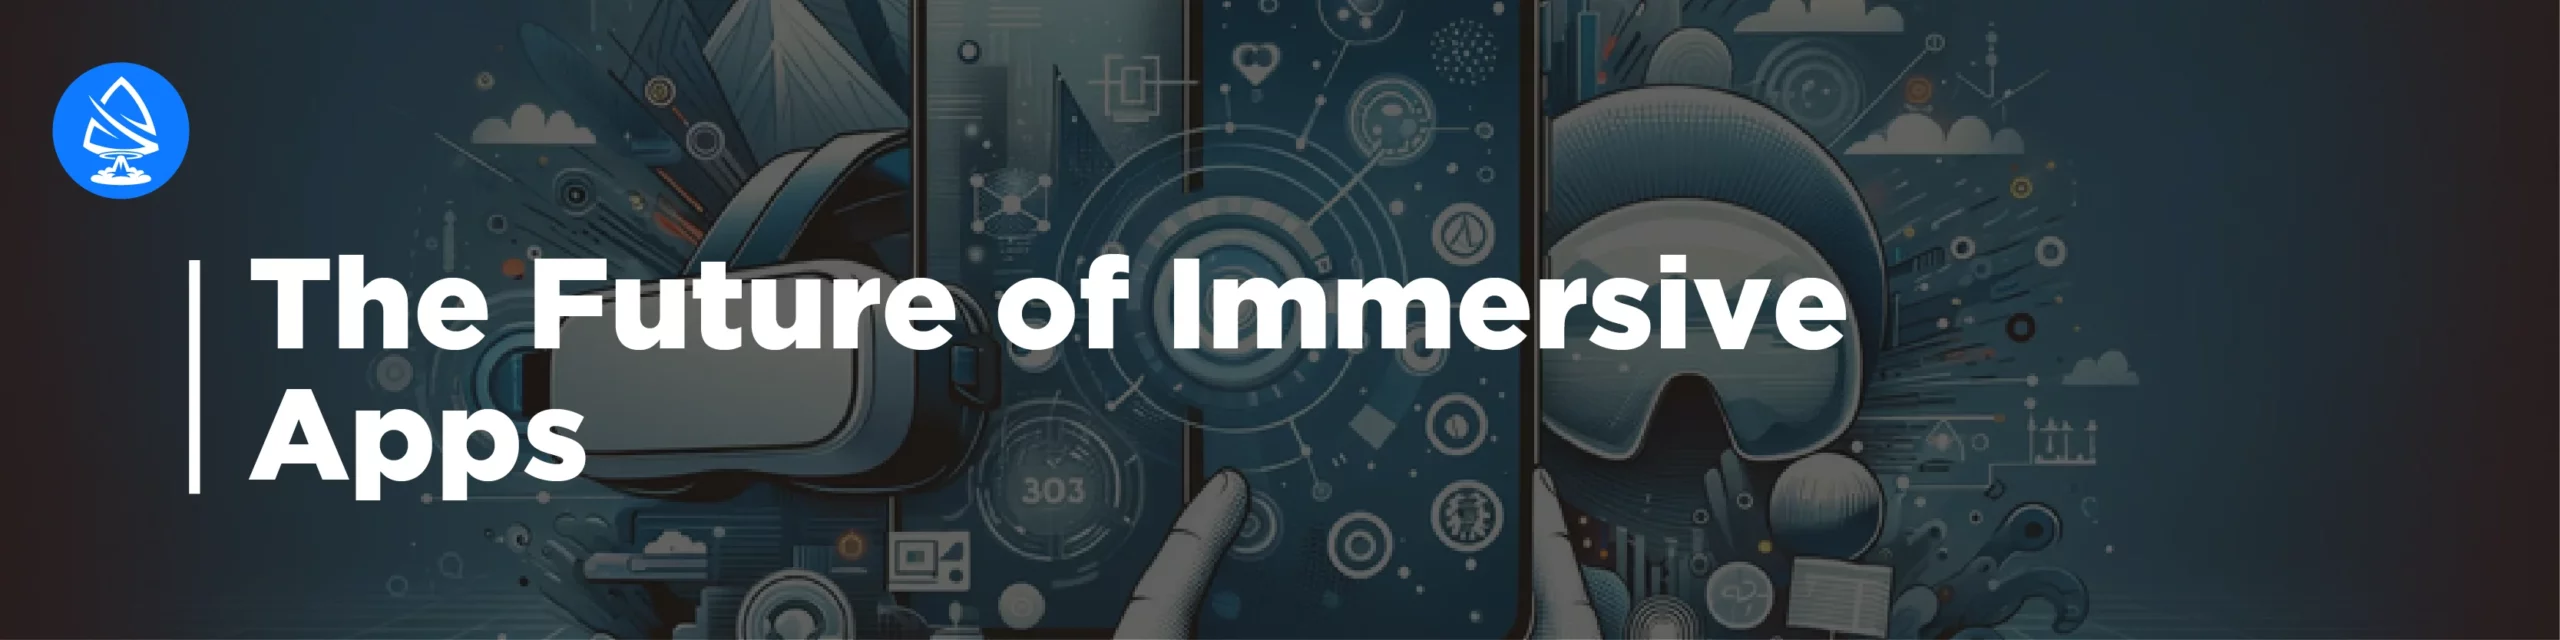 The Future of Immersive Apps